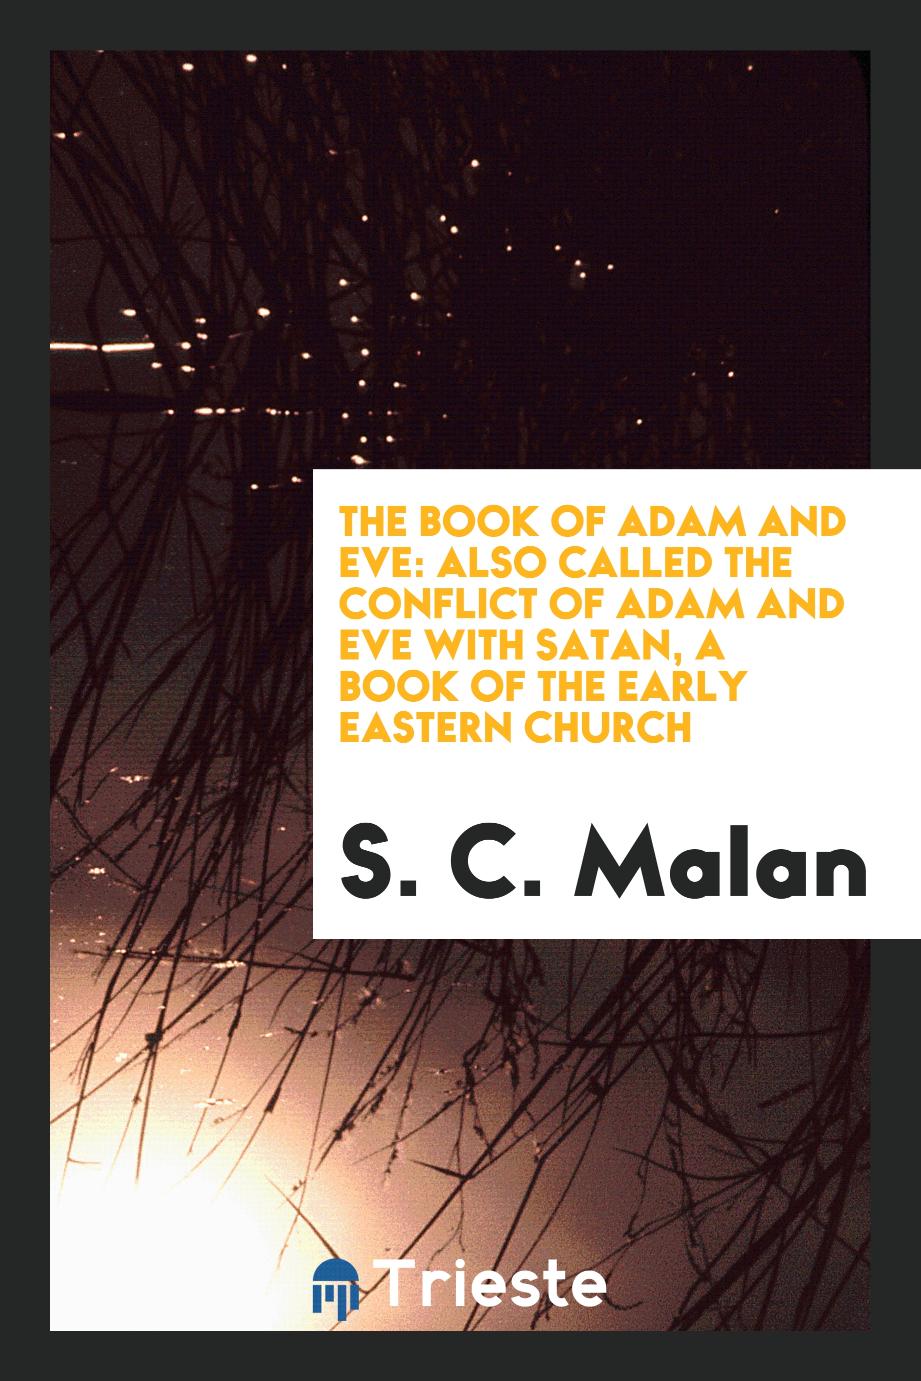 The Book of Adam and Eve: Also Called the Conflict of Adam and Eve with Satan, a Book of the Early Eastern Church